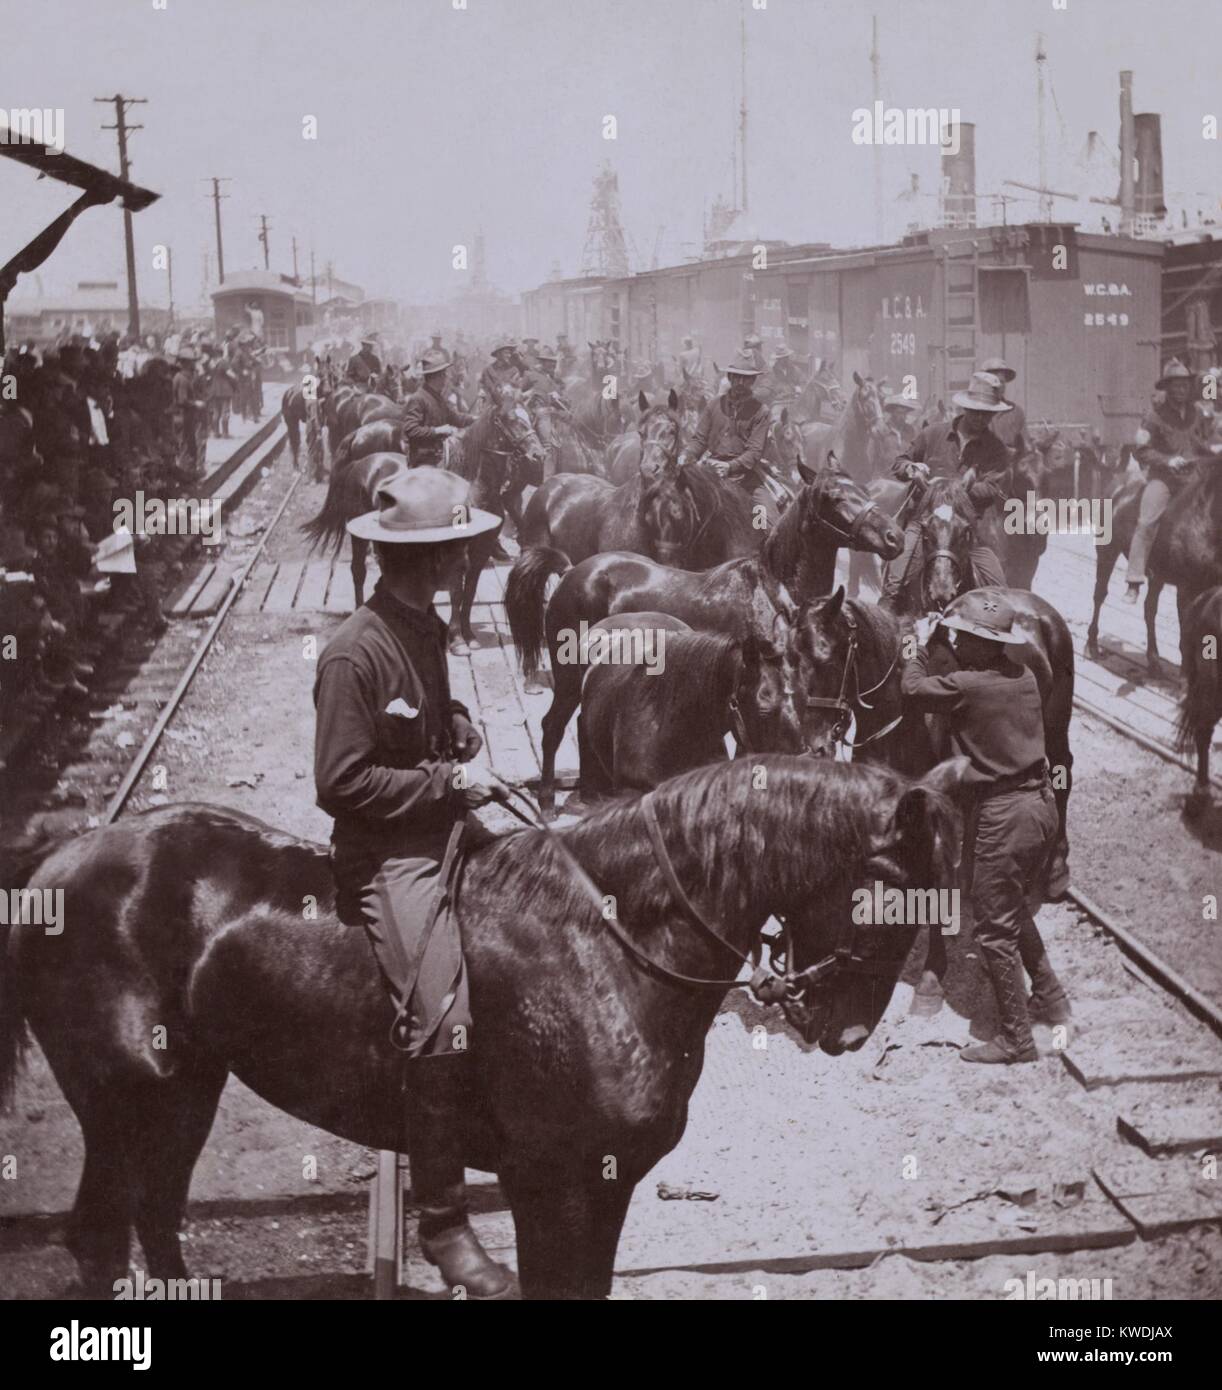 Rough Riders arrival at Tampa, Florida for transport to Cuba. Theodore Roosevelts 1st United States Volunteer Cavalry, struggled to find room on the troop ships, with only eight of the twelve companies making it to the war zone. June 23, 1898 (BSLOC 2017 10 15) Stock Photo